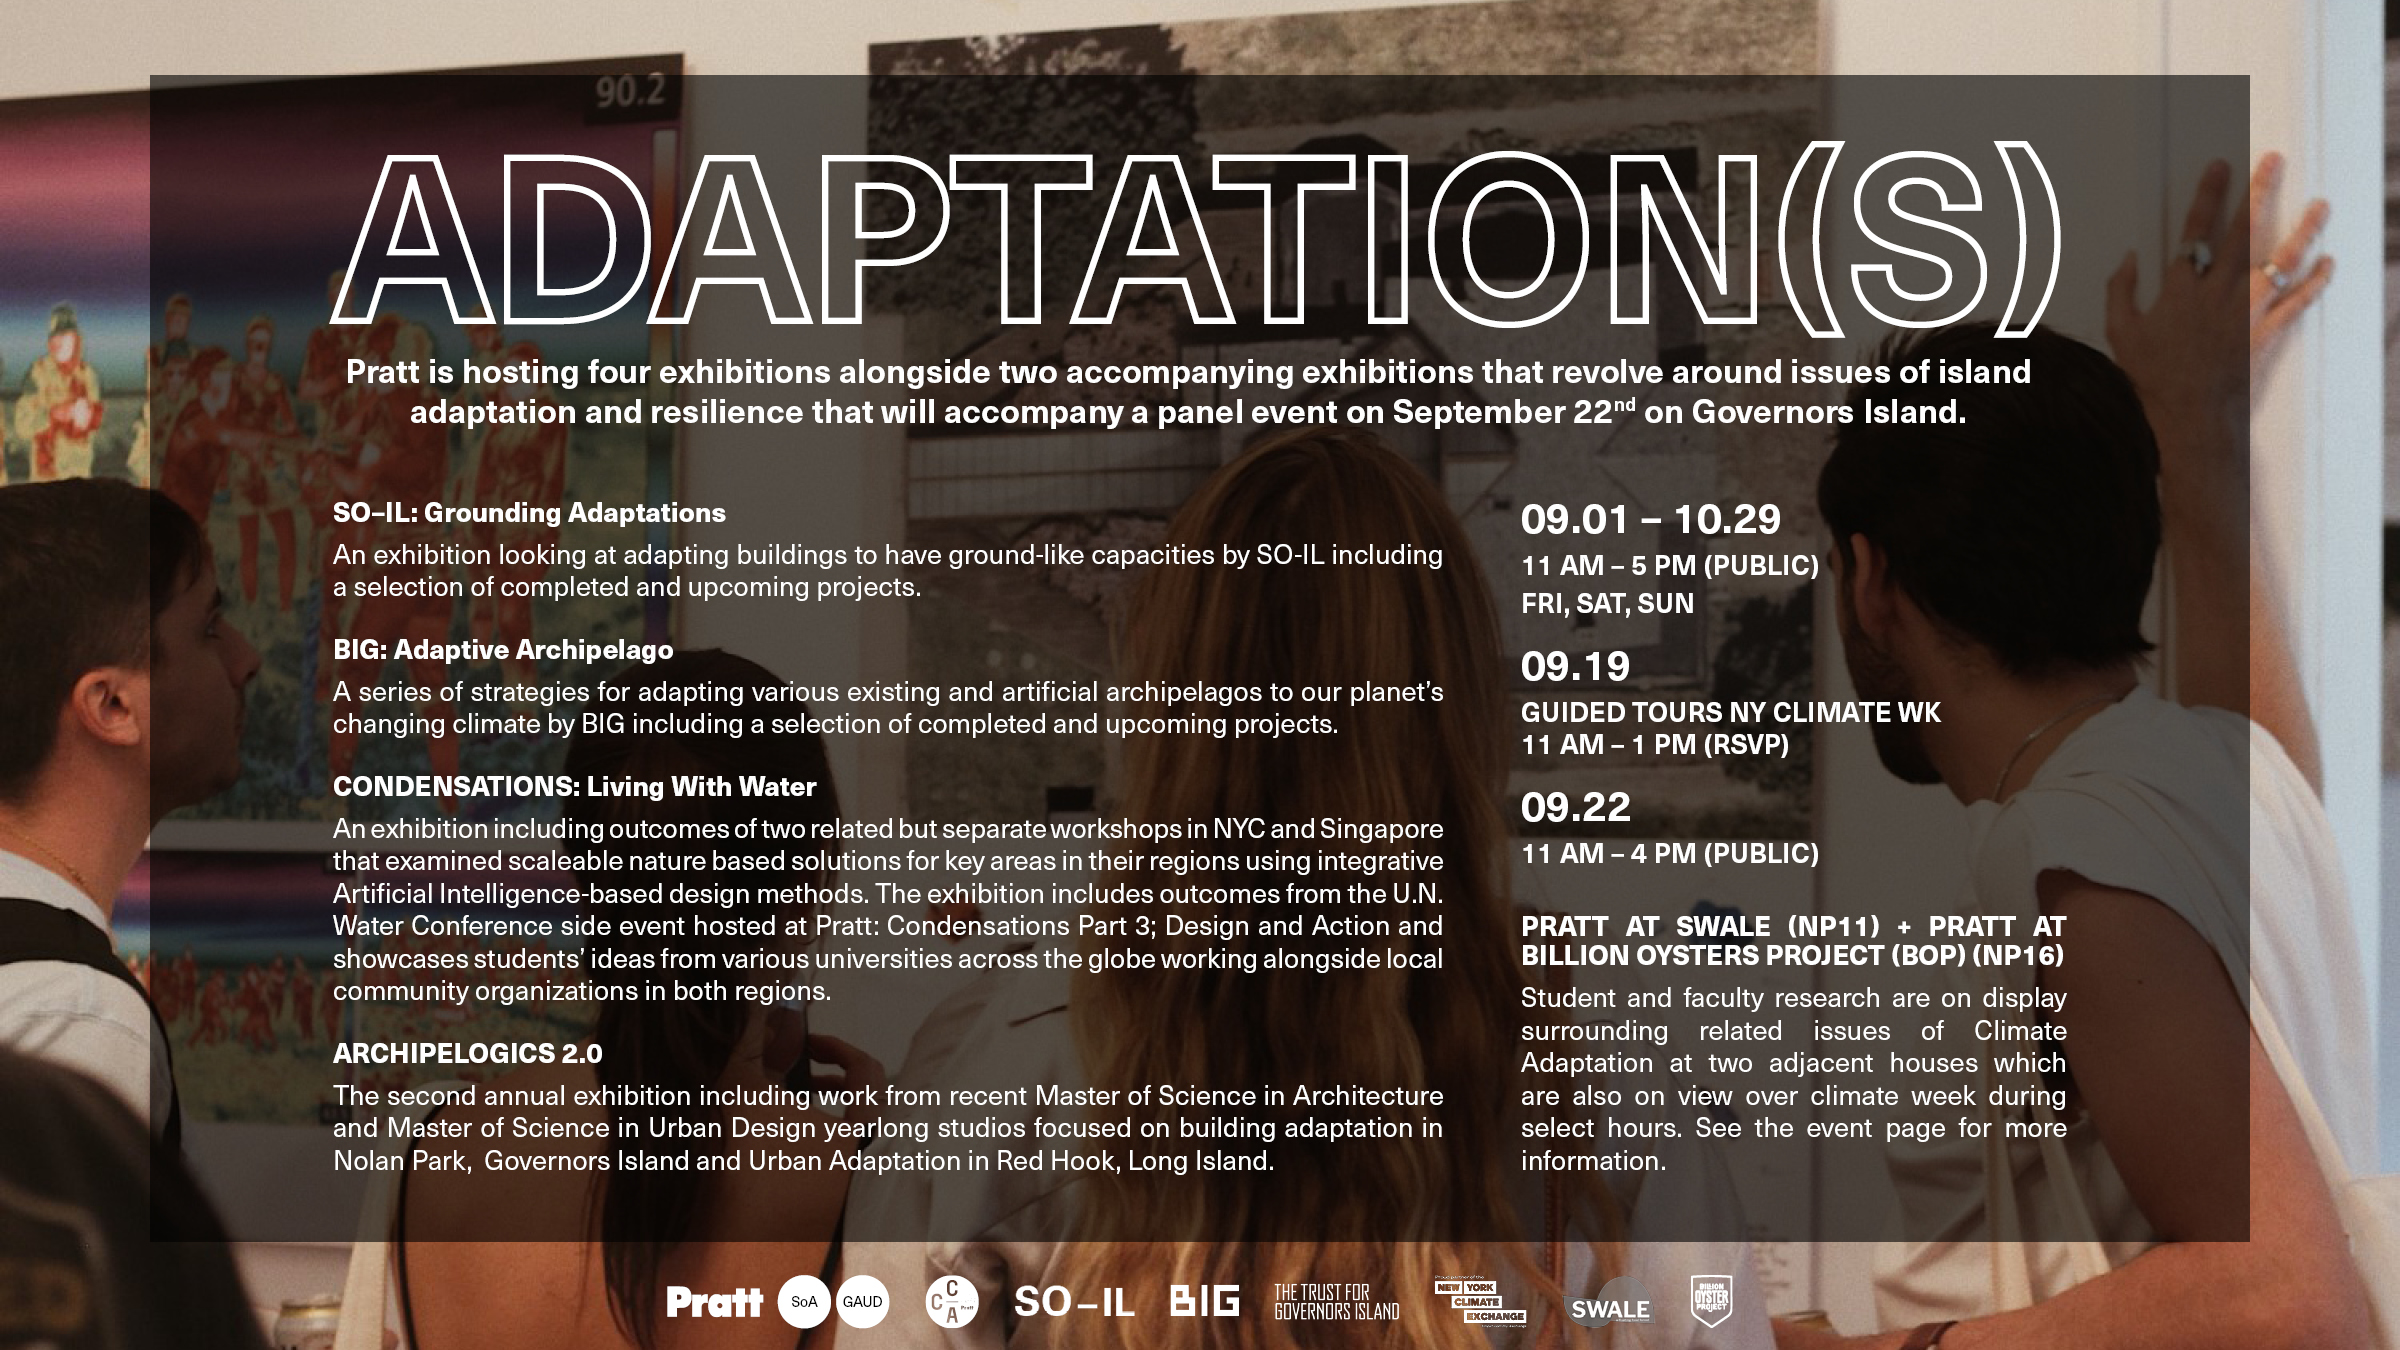 A poster for the Adaptation(s) exhibitions. There is content on the poster which is also included in the event description.